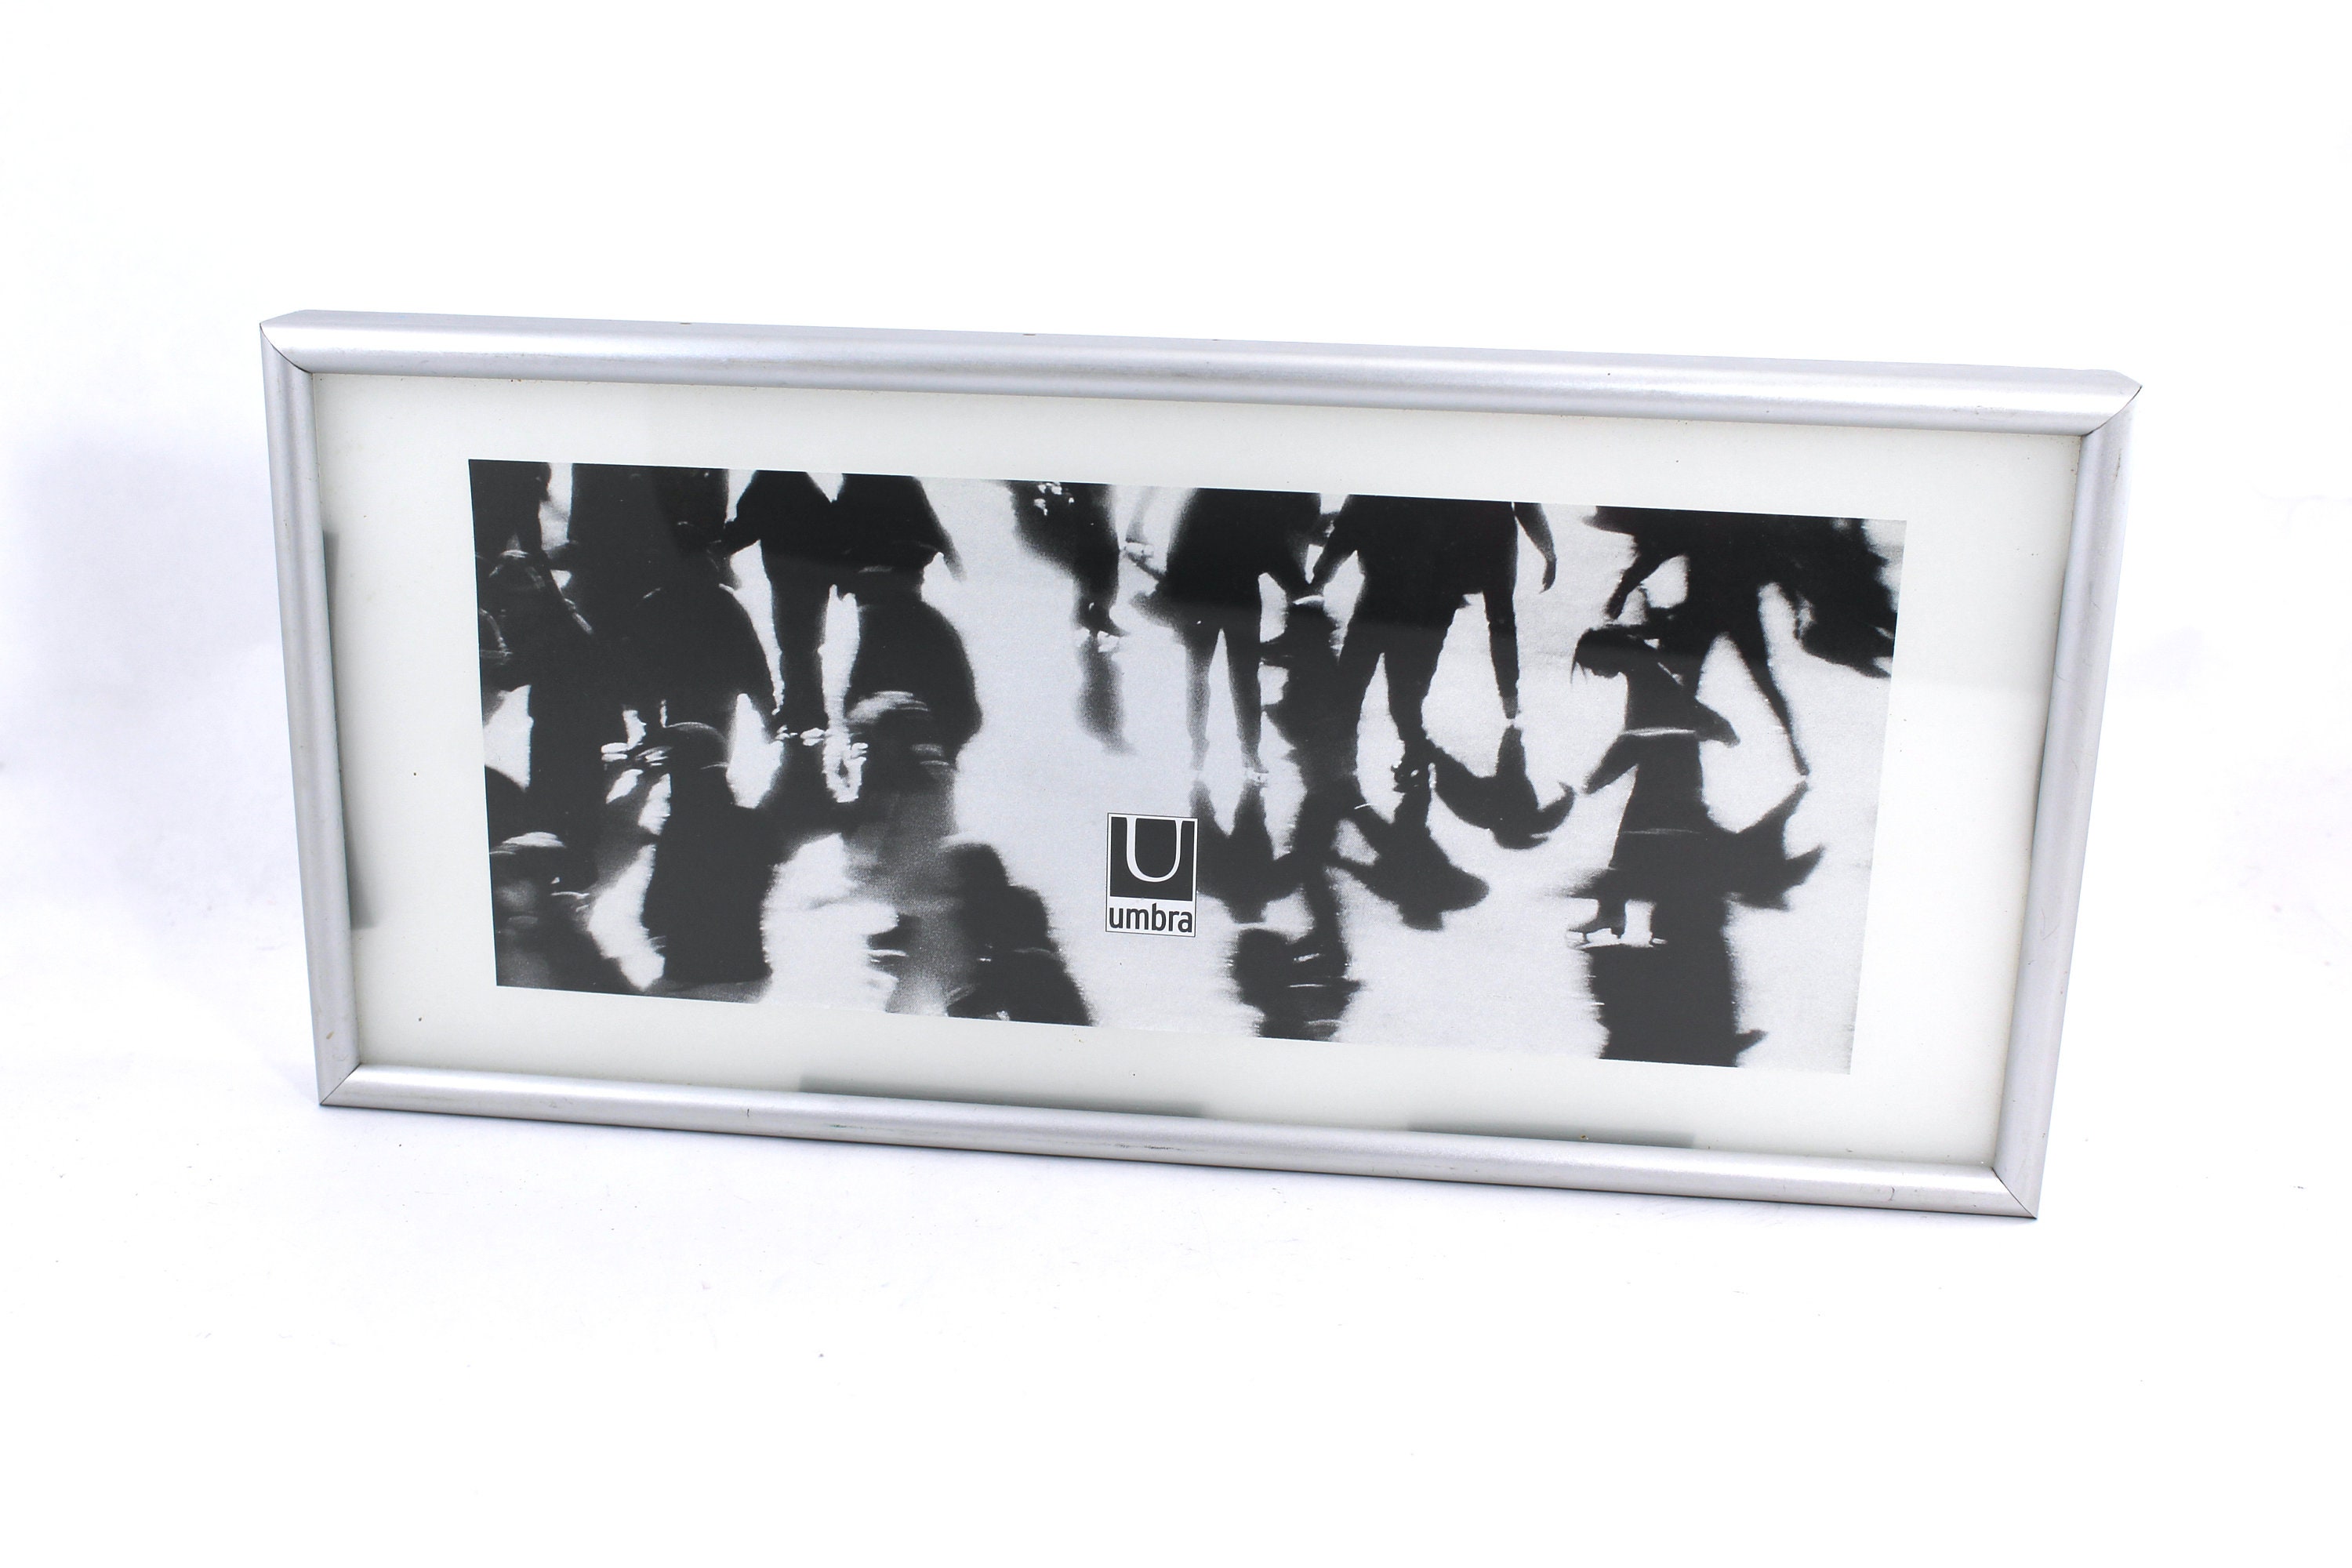 4x10 Panoramic Magnetic Frames